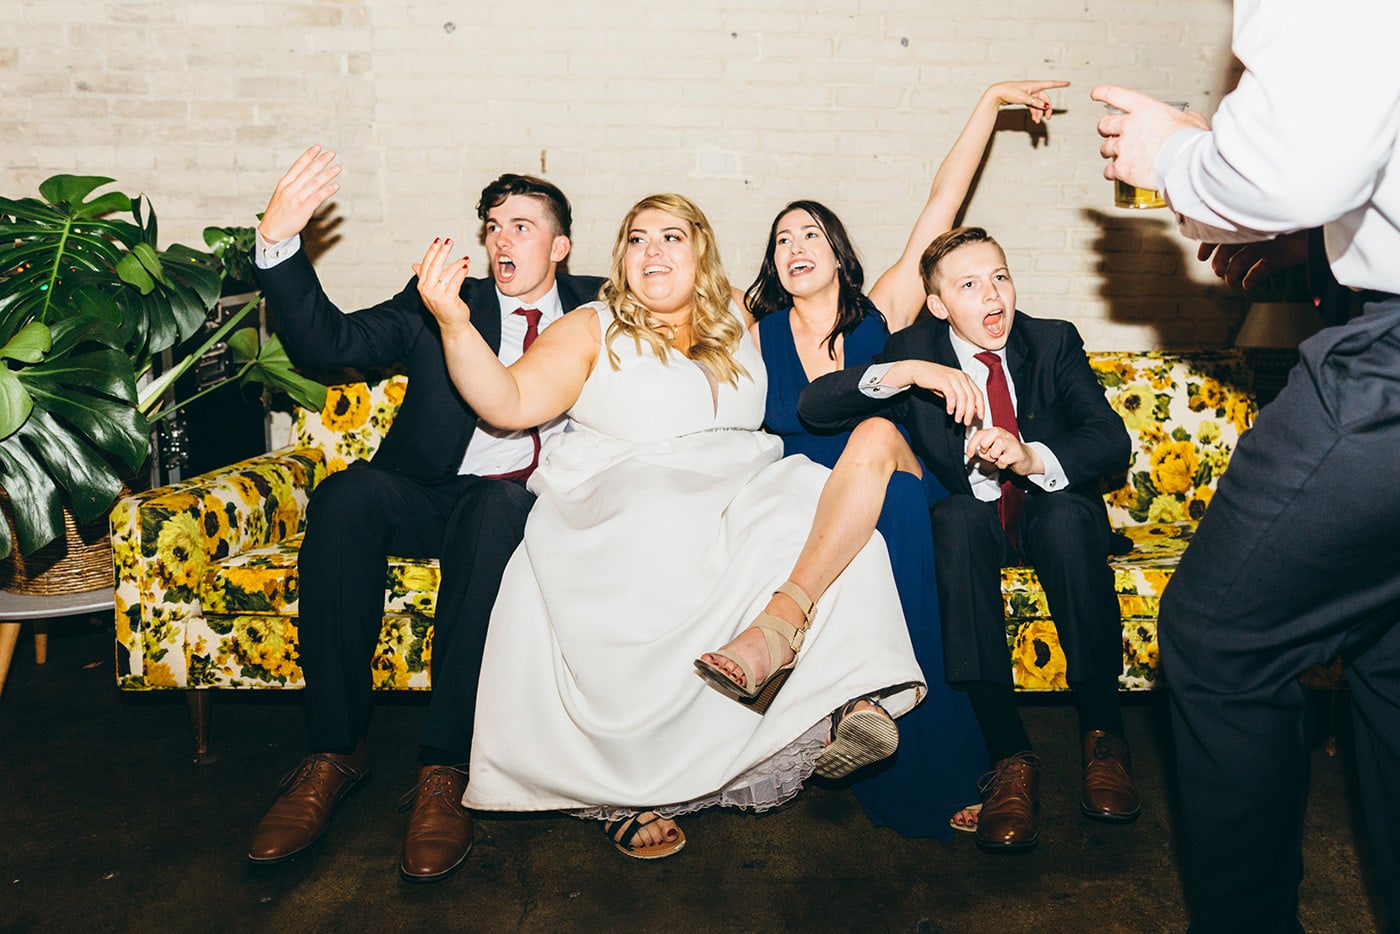 Funny, Lifestyle Photo Of Bride With Her Siblings At Wedding Reception